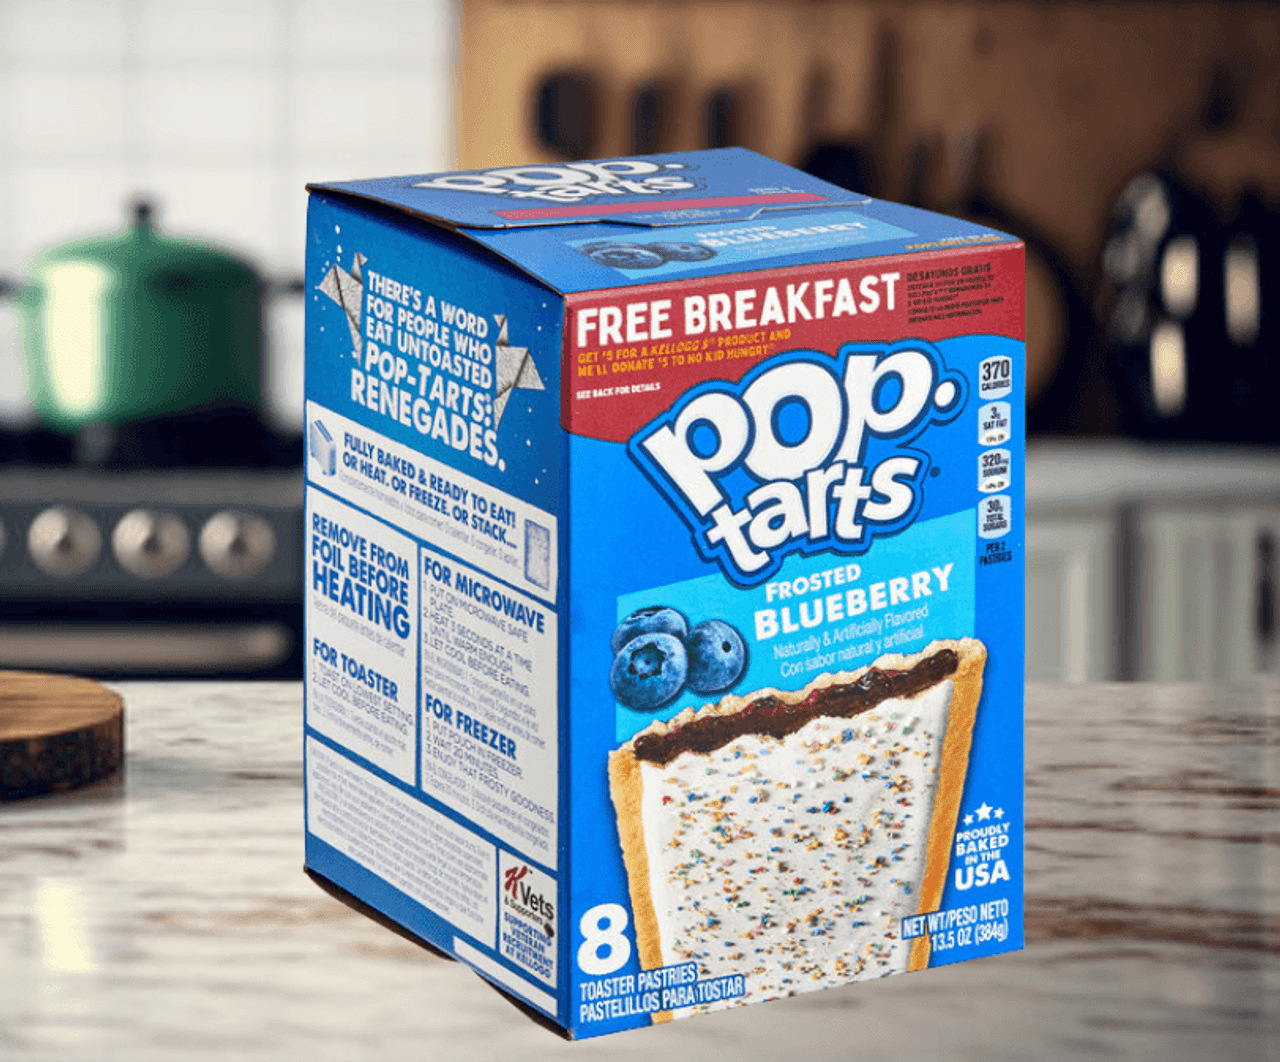 Pop-Tarts Frosted S'mores 8 count (2pack) by Kellogg's